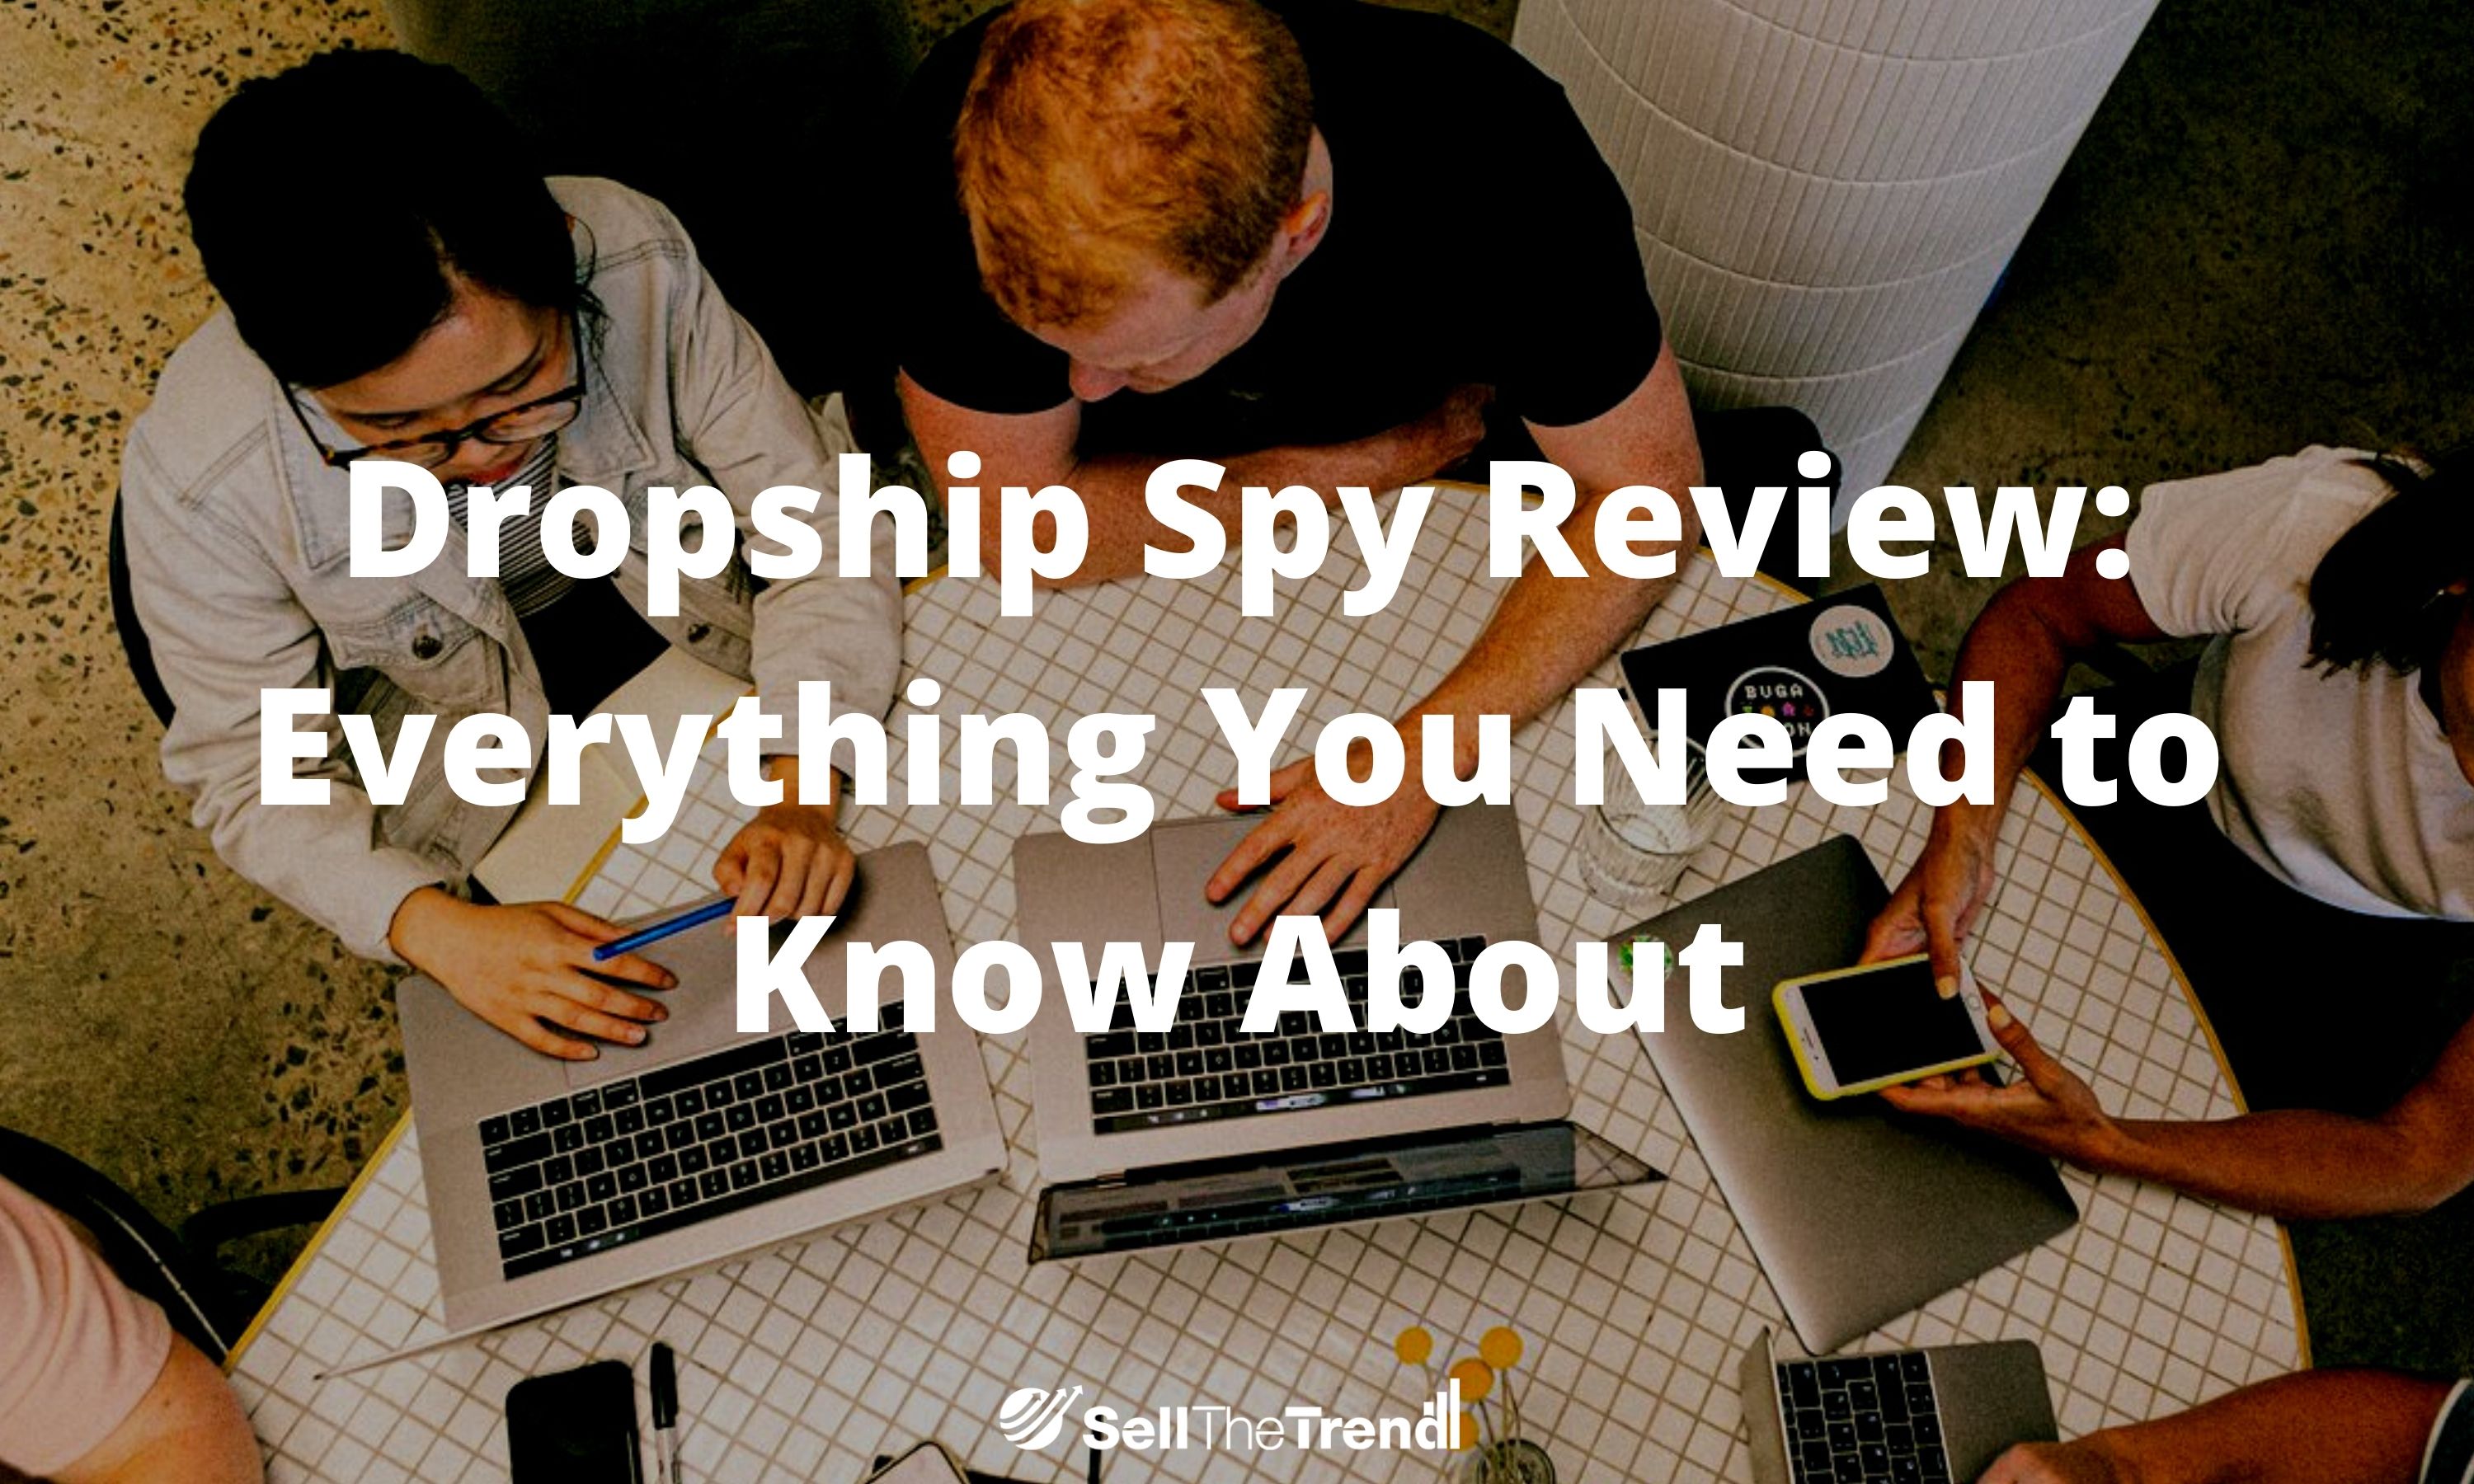 Dropship Spy Review: Everything You Need to Know About